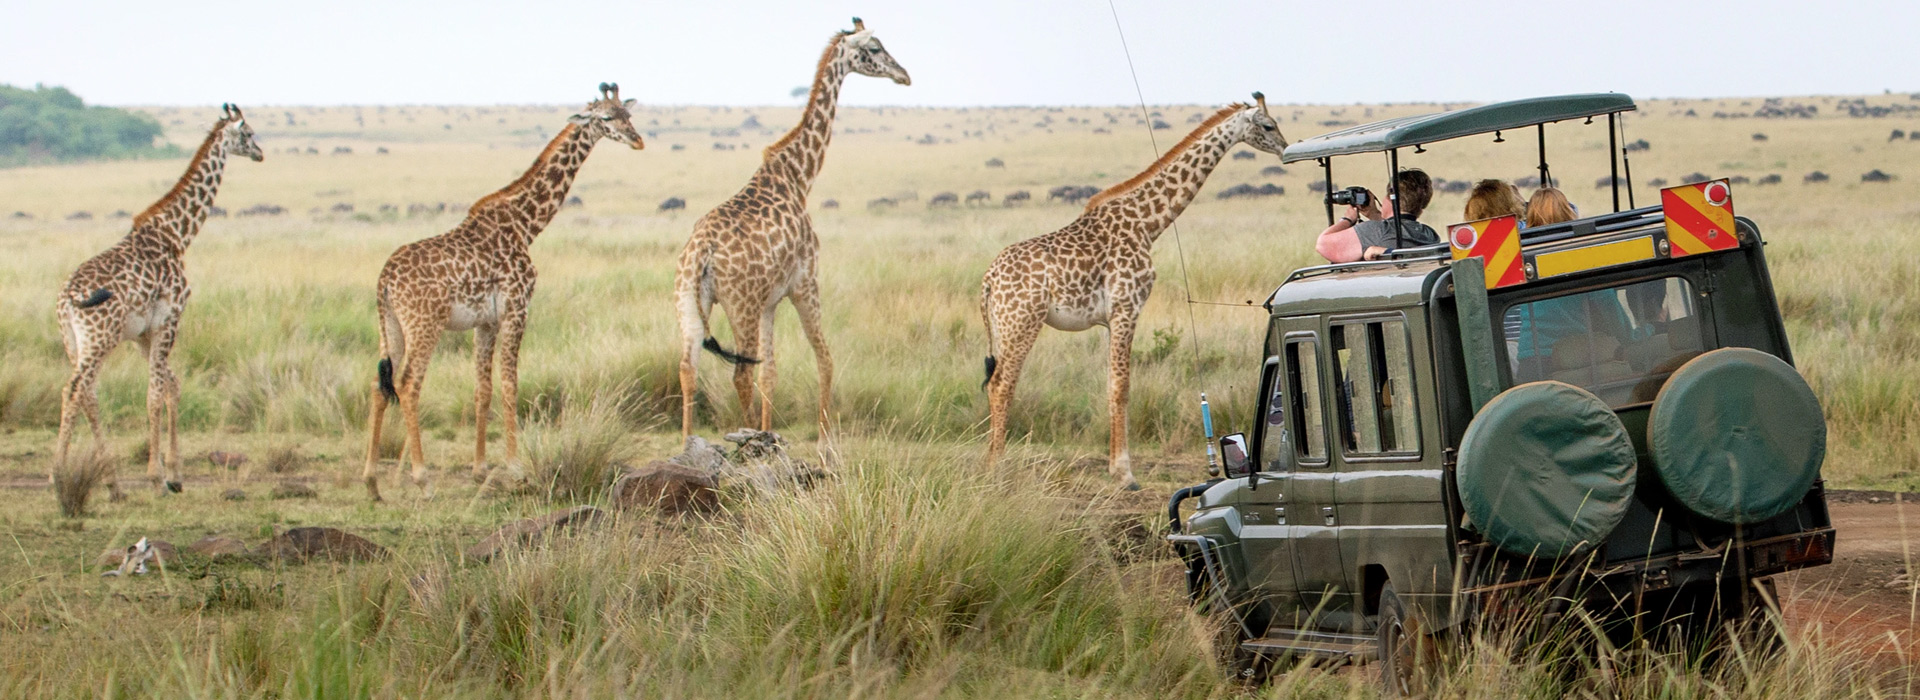 Kenya Park / conservation fees (January 2022 to 30th June, 2022)